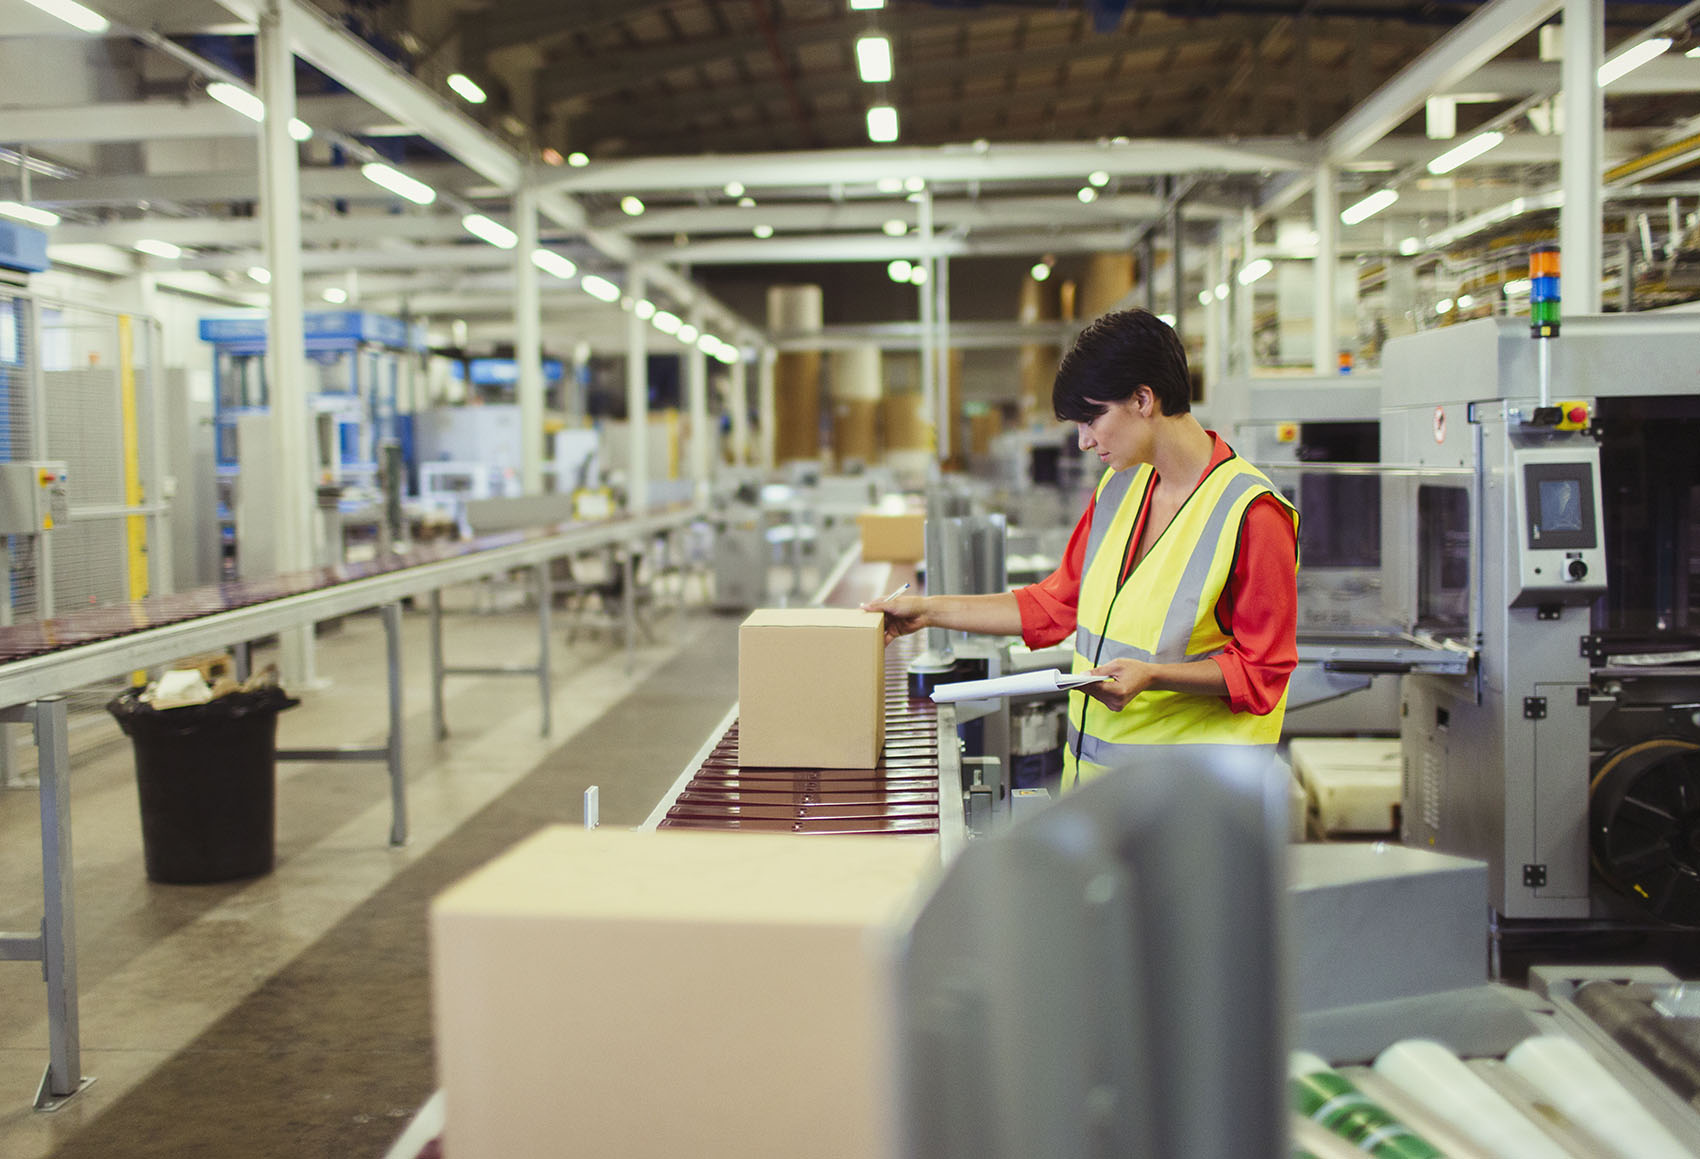 Worker checking cardboard boxes on conveyor belt production line in factory